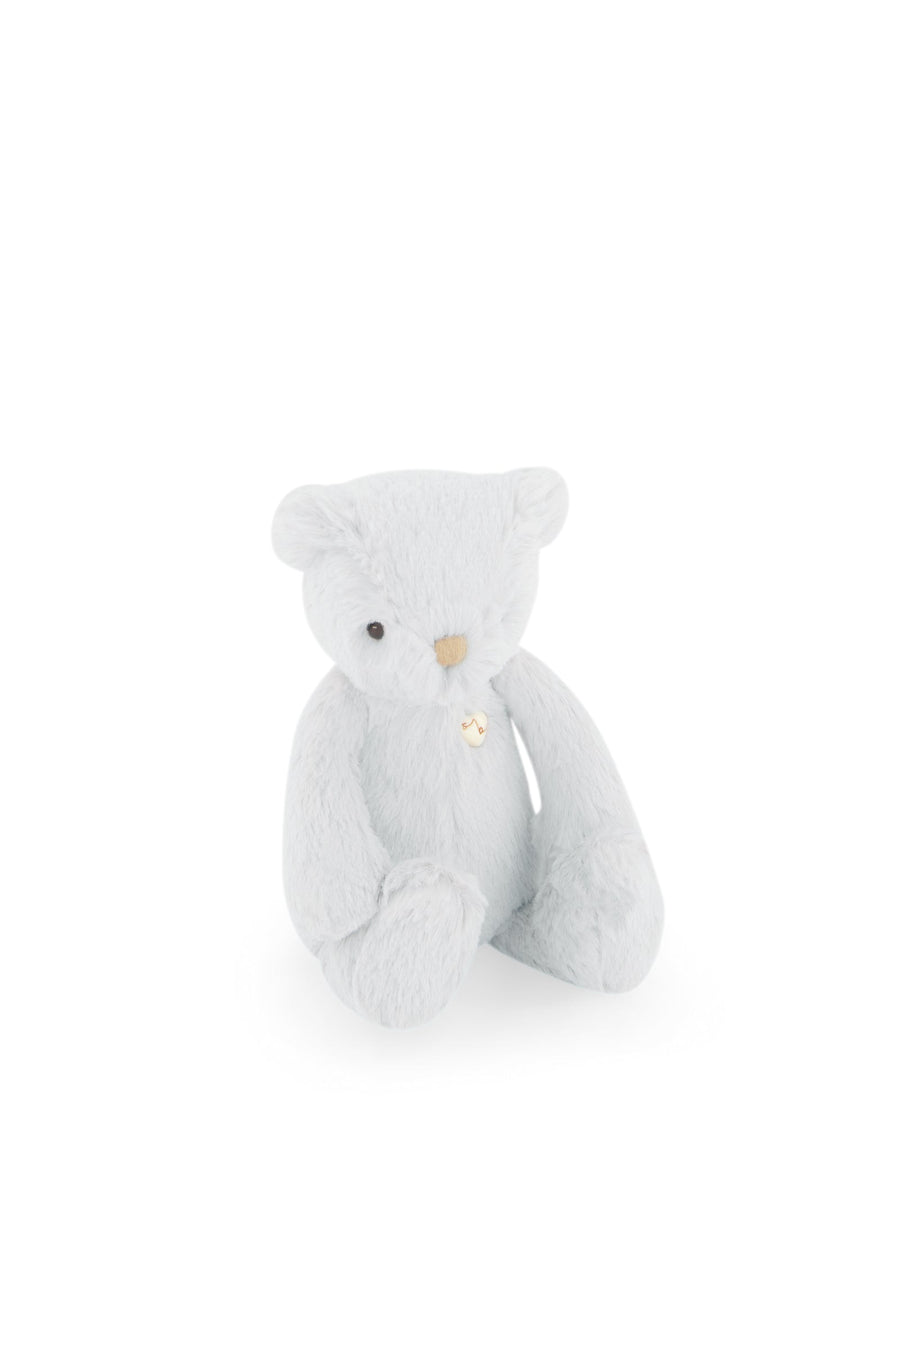 Snuggle Bunnies - George the Bear - Moonbeam Childrens Toy from Jamie Kay NZ